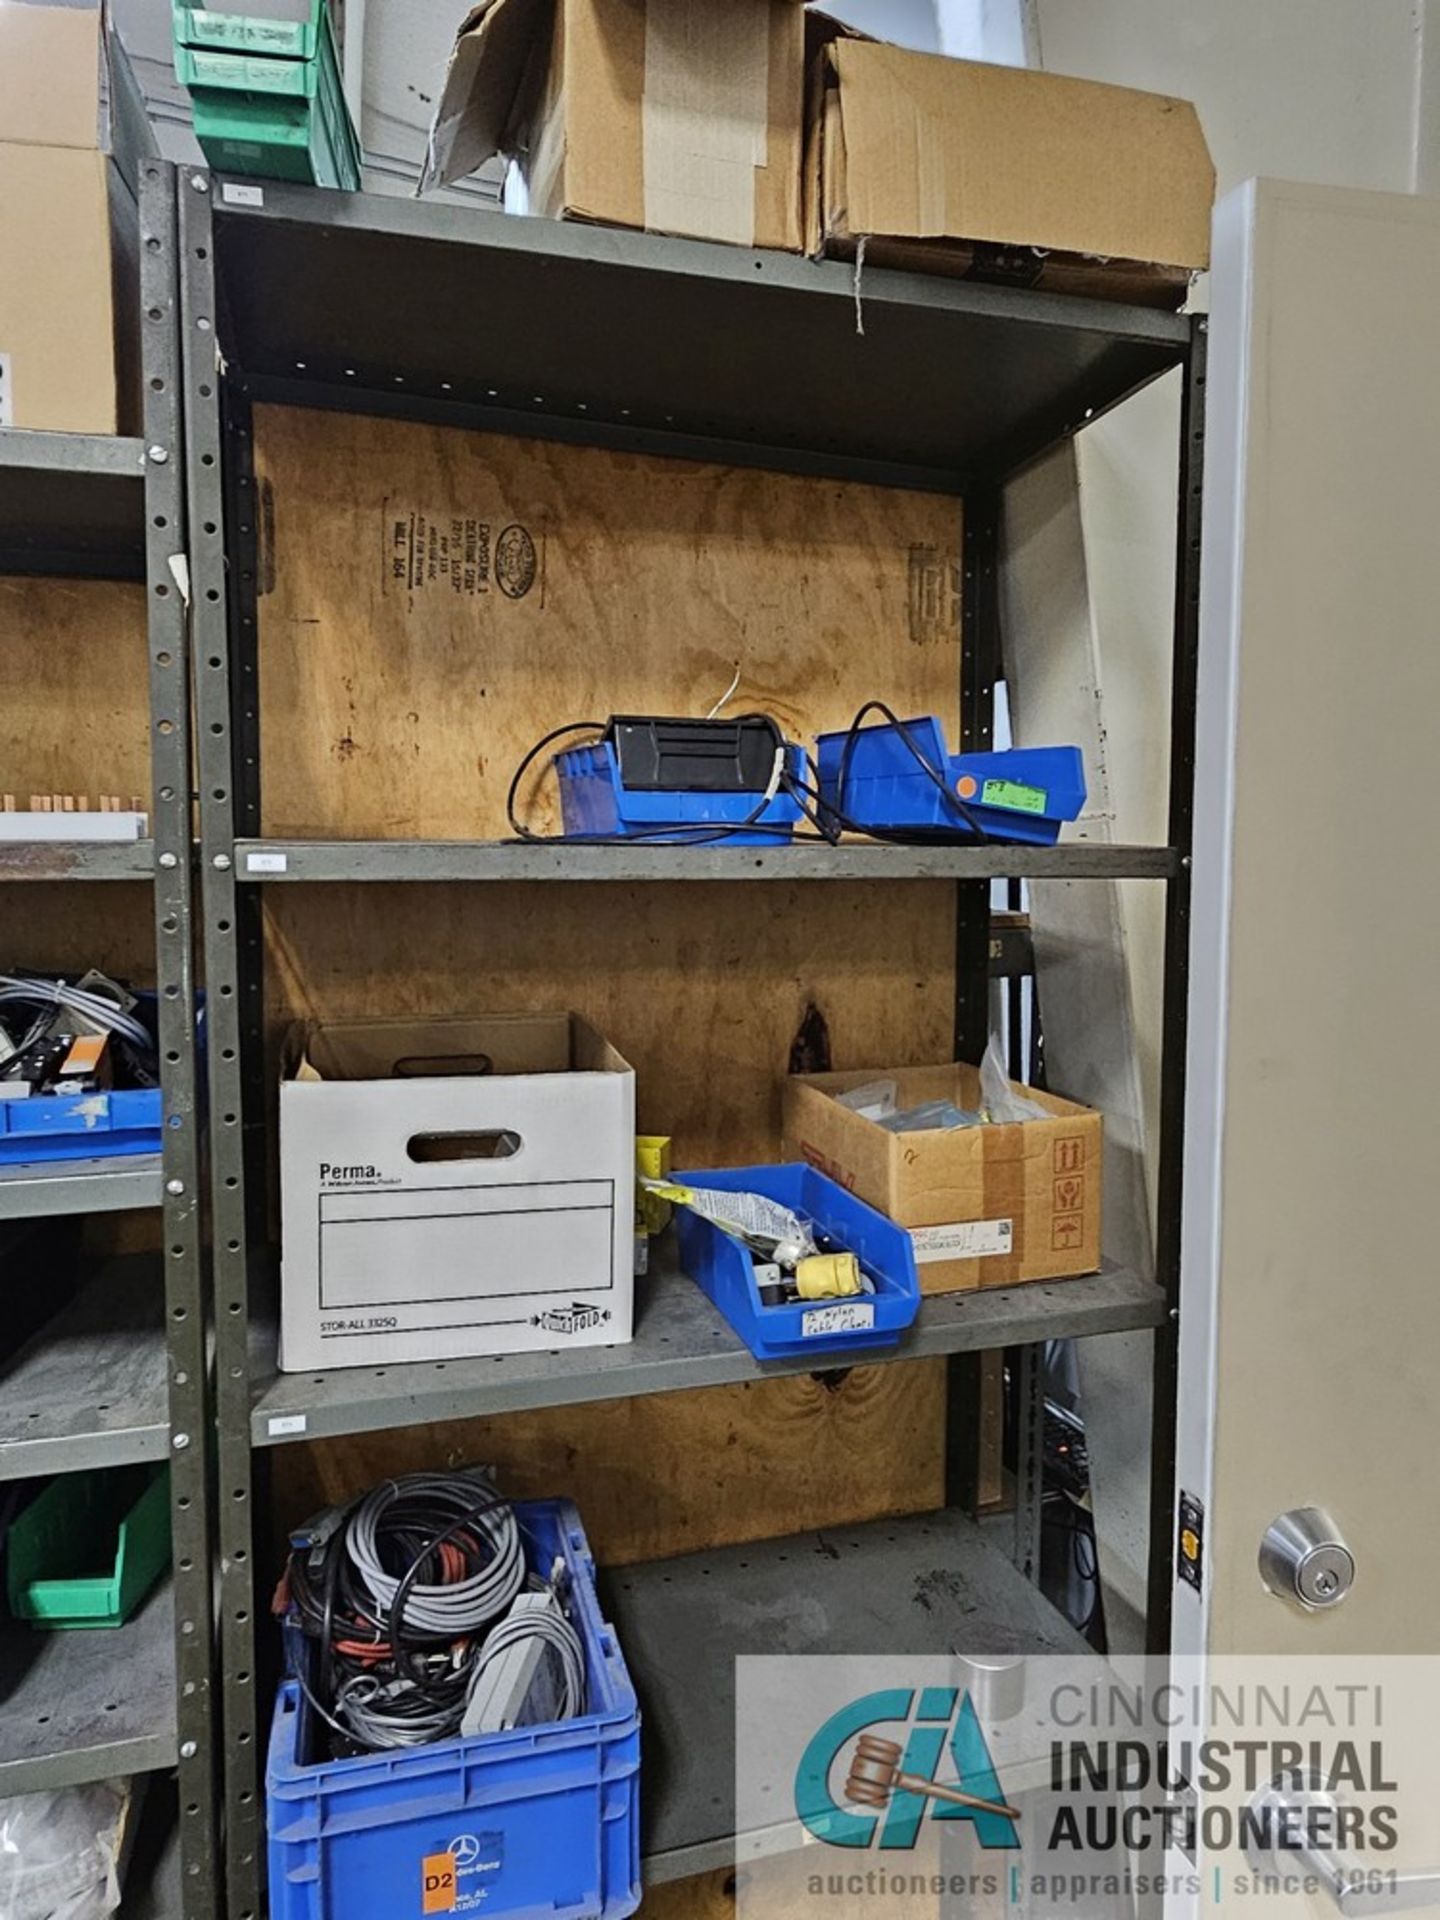 SECTIONS STEEL SHELVING WITH CONTENTS; ELECTRIC PARTS AND MISCELLANEOUS TOOLTEX ITEMS - Image 2 of 6